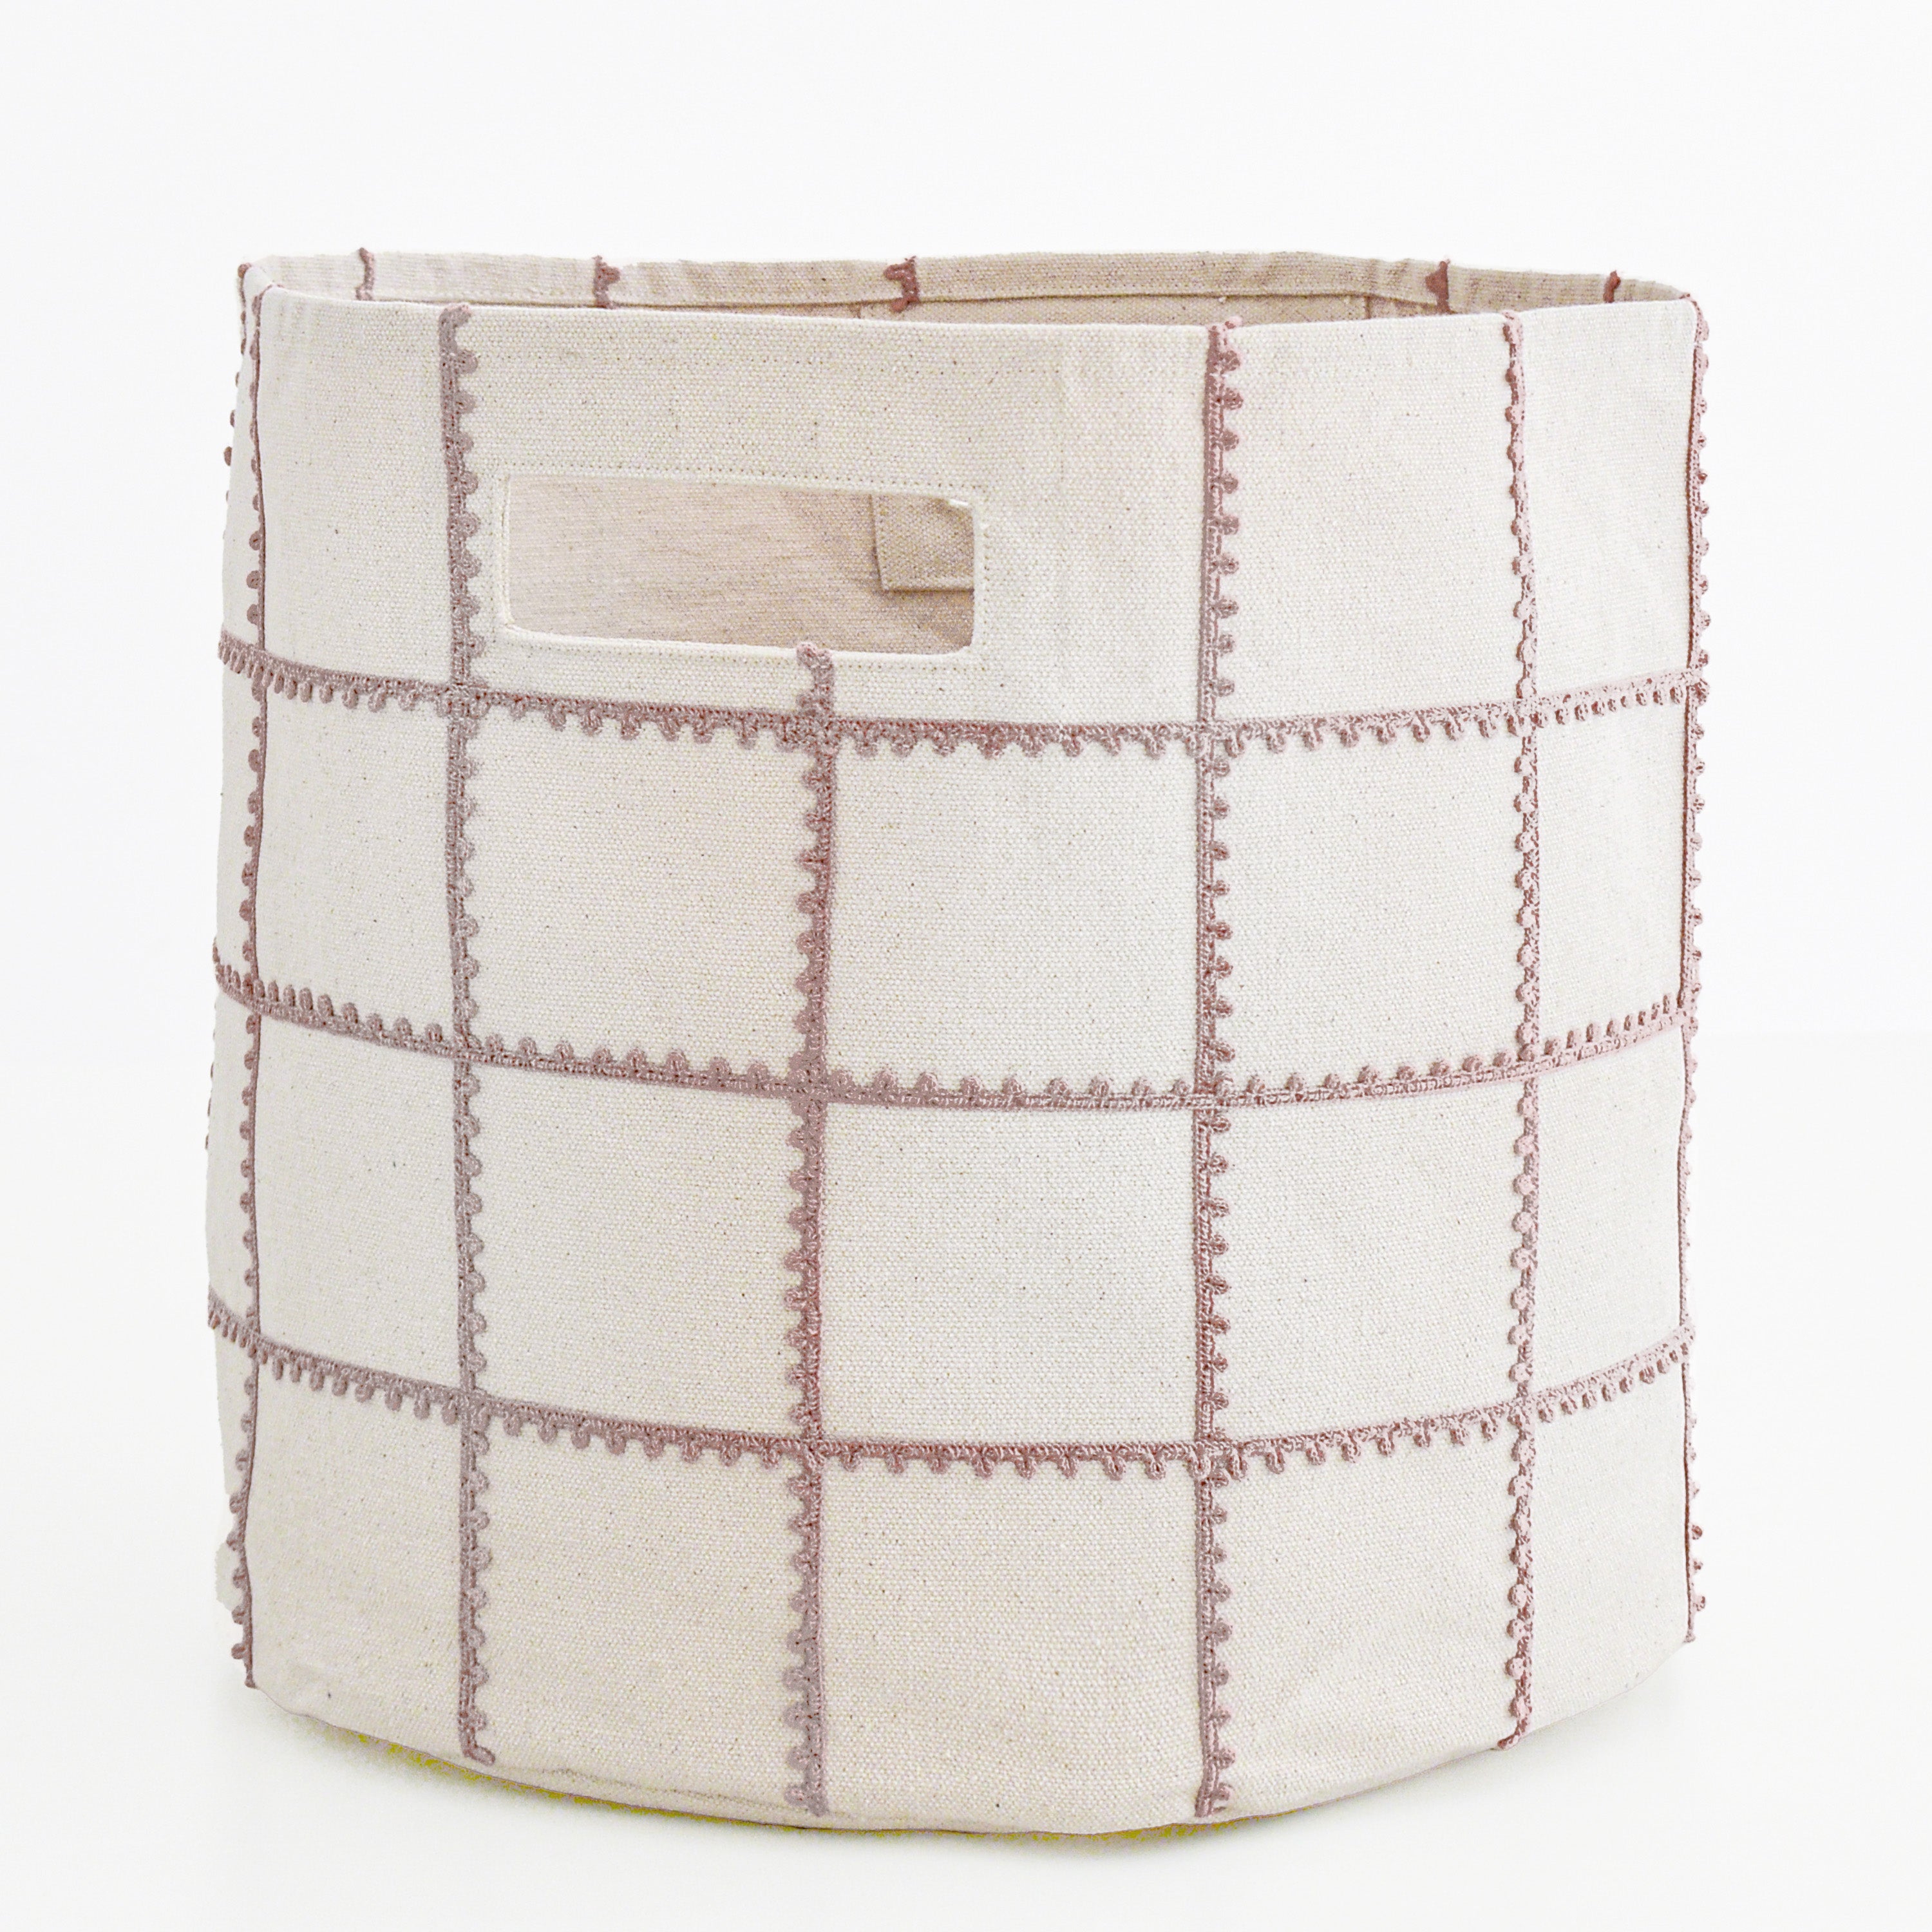 A beige Makemake Organics storage basket with a patchwork design and pink stitched details, featuring a small rectangular label on one side. the basket is set against a white background.